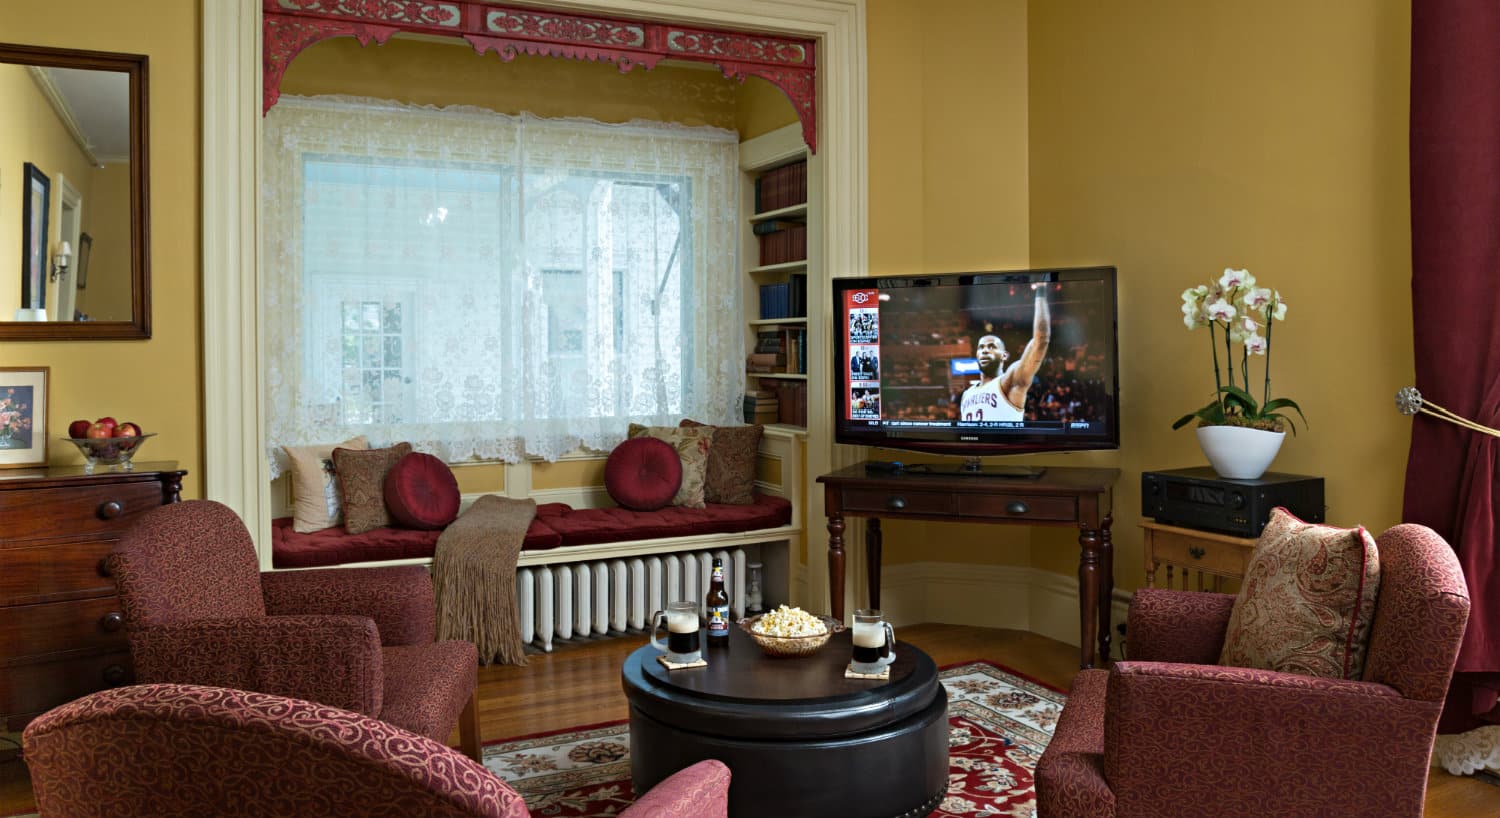 A TV in the corner of a parlor with rose colored chairs surrounded for viewing.